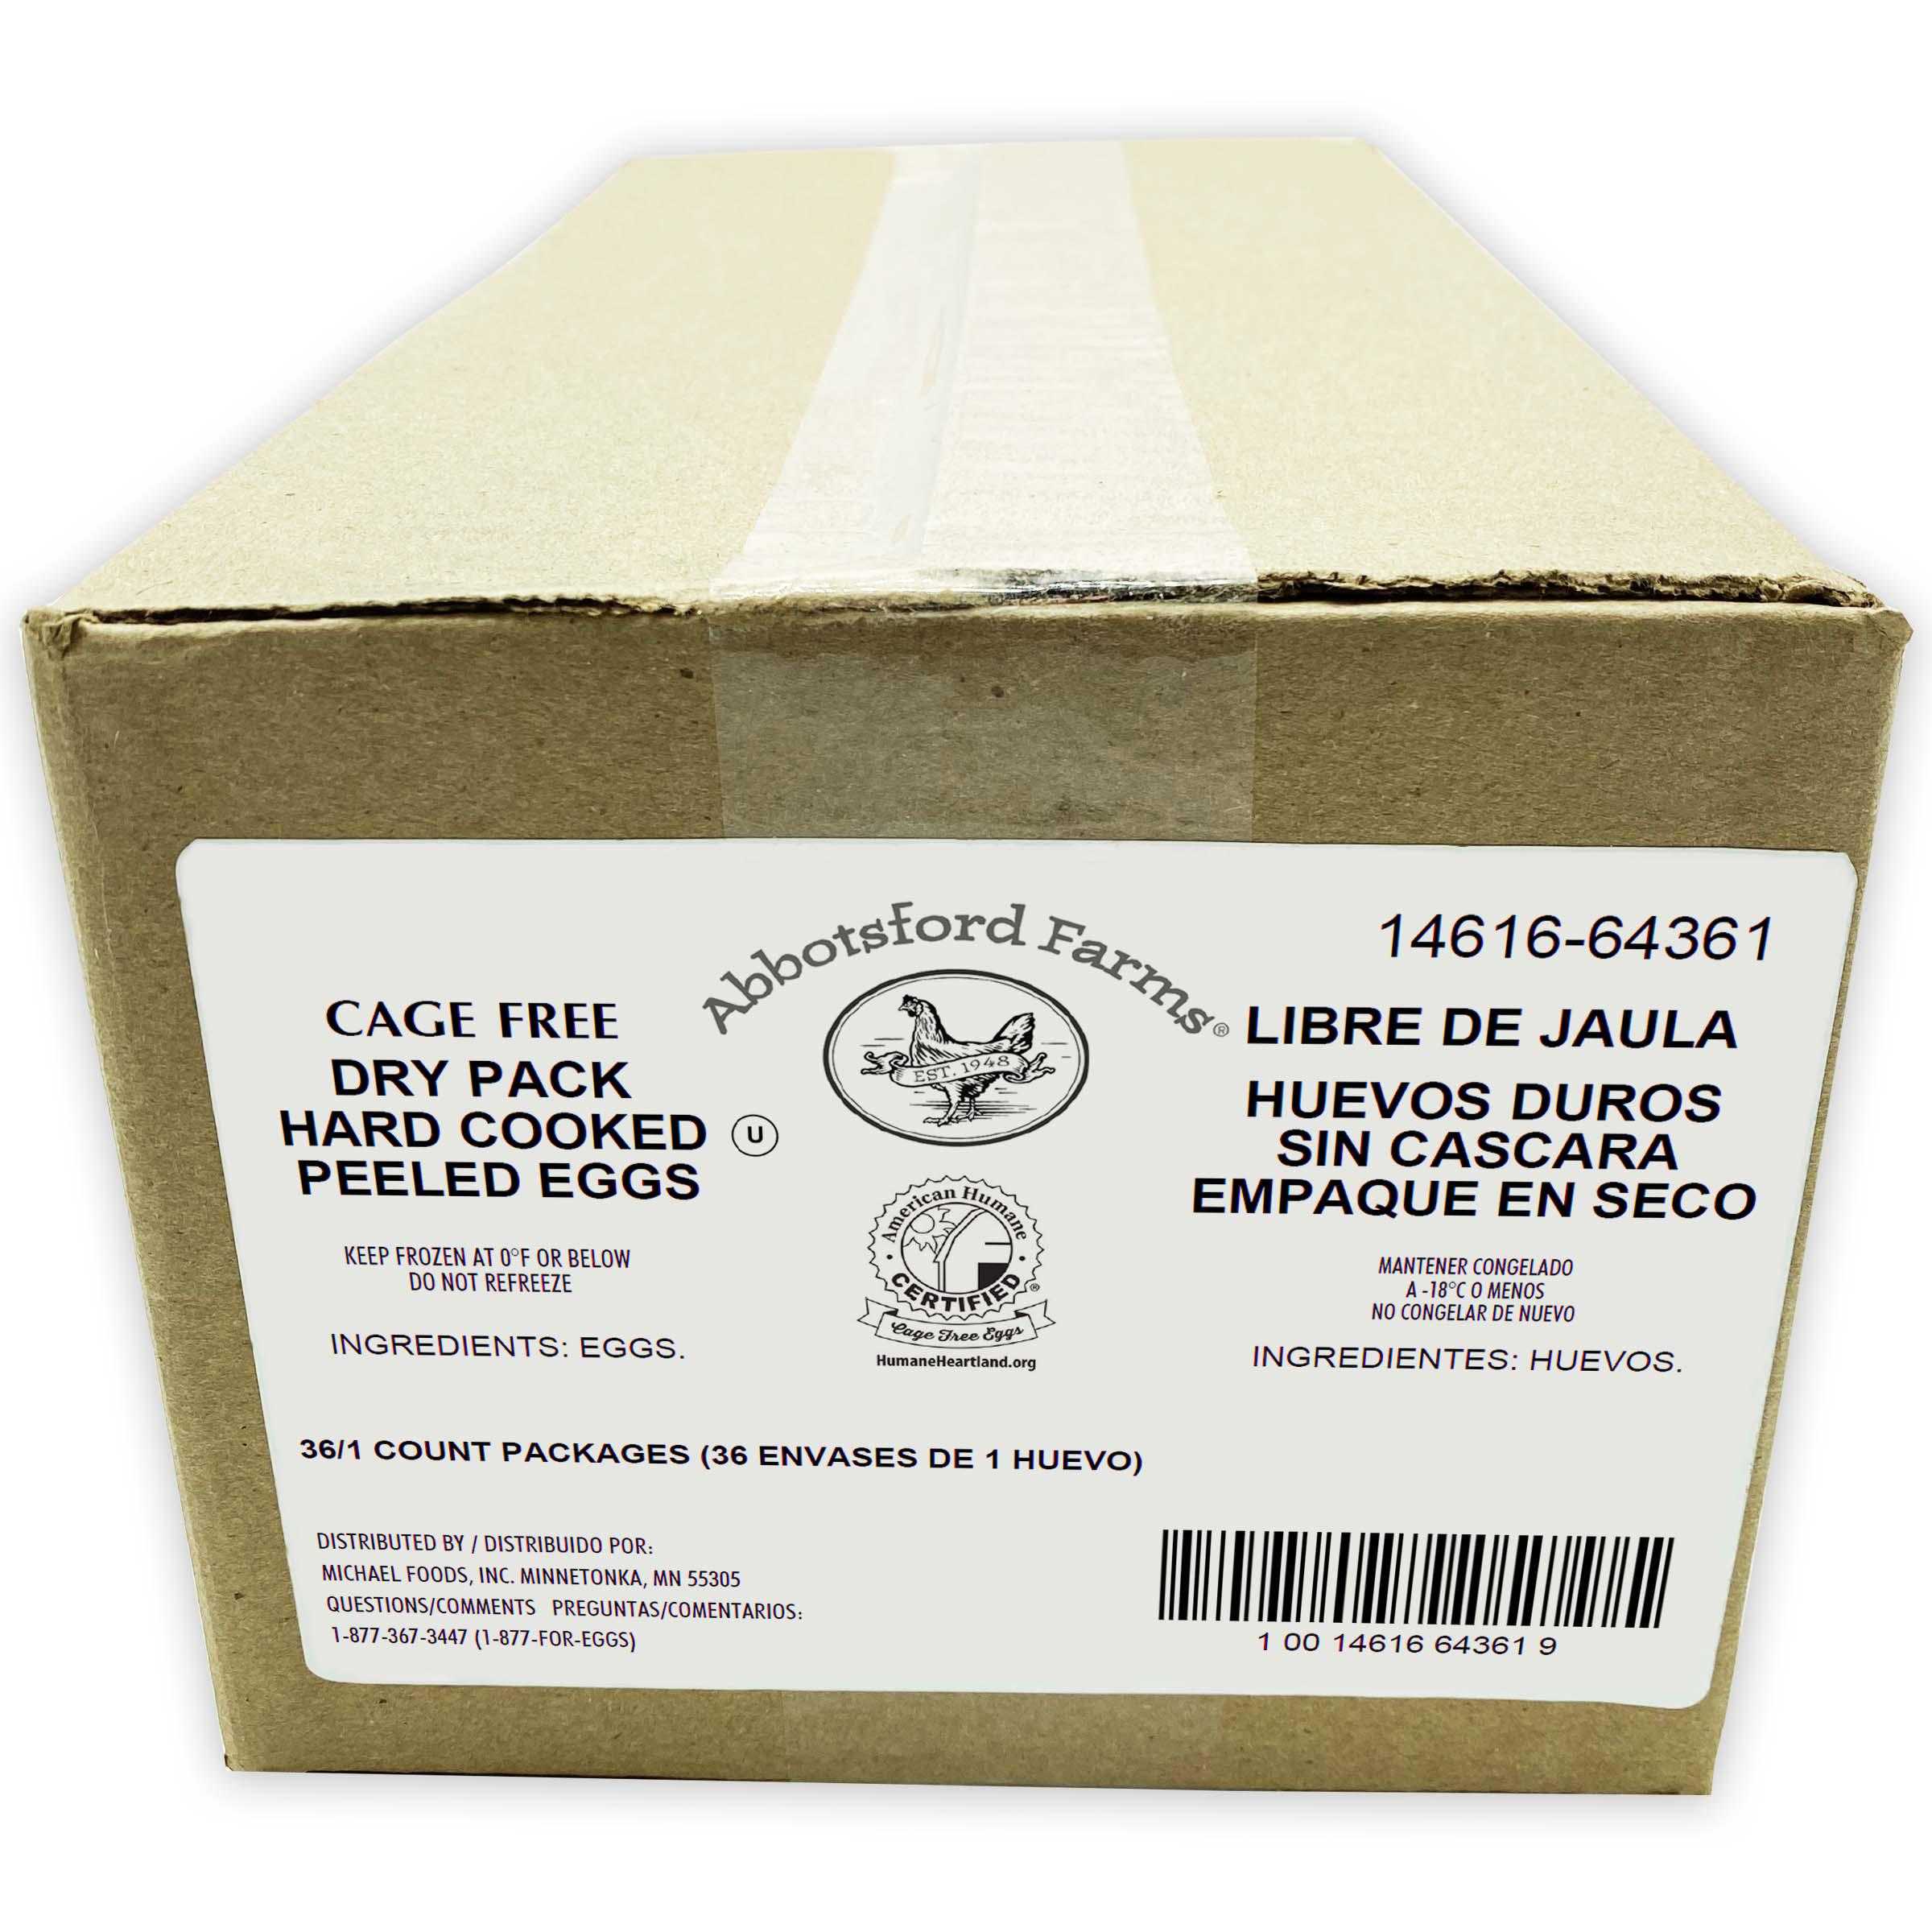 Abbotsford Farms® American Humane Certified Cage Free Peeled Hard Cooked Eggs, 36/1 Count Dry Pack